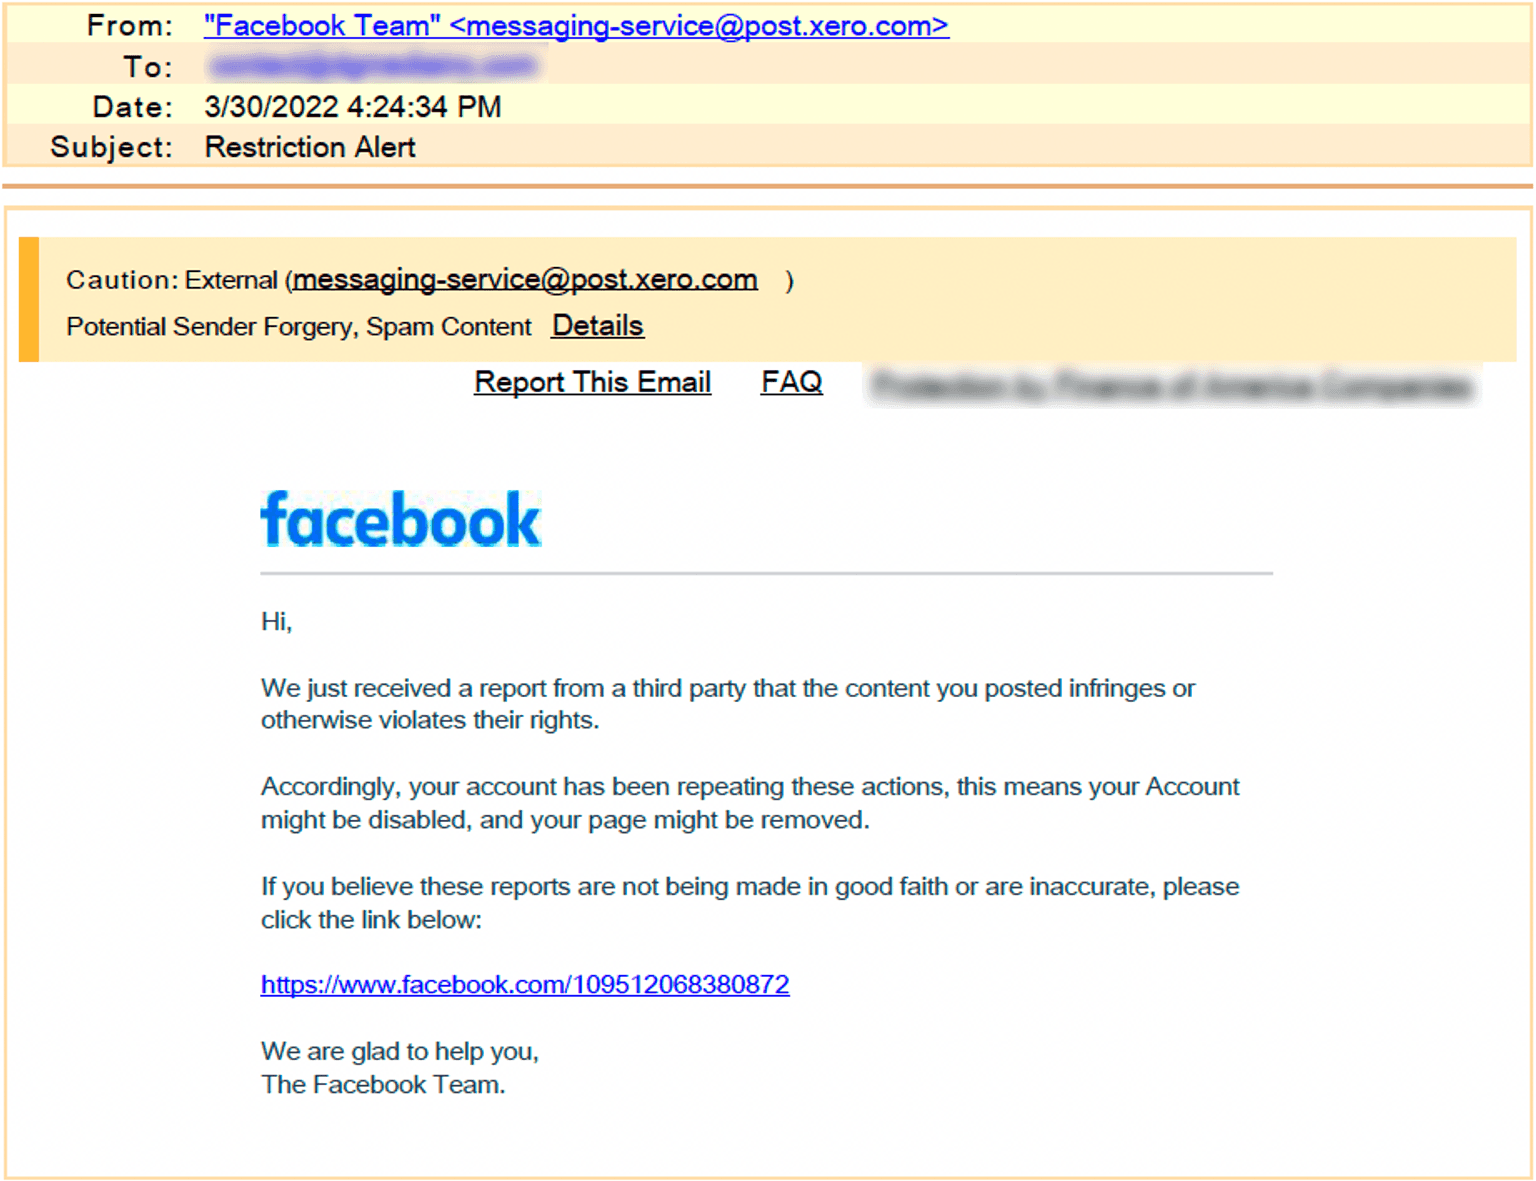 Facebook phishing email with redirect link